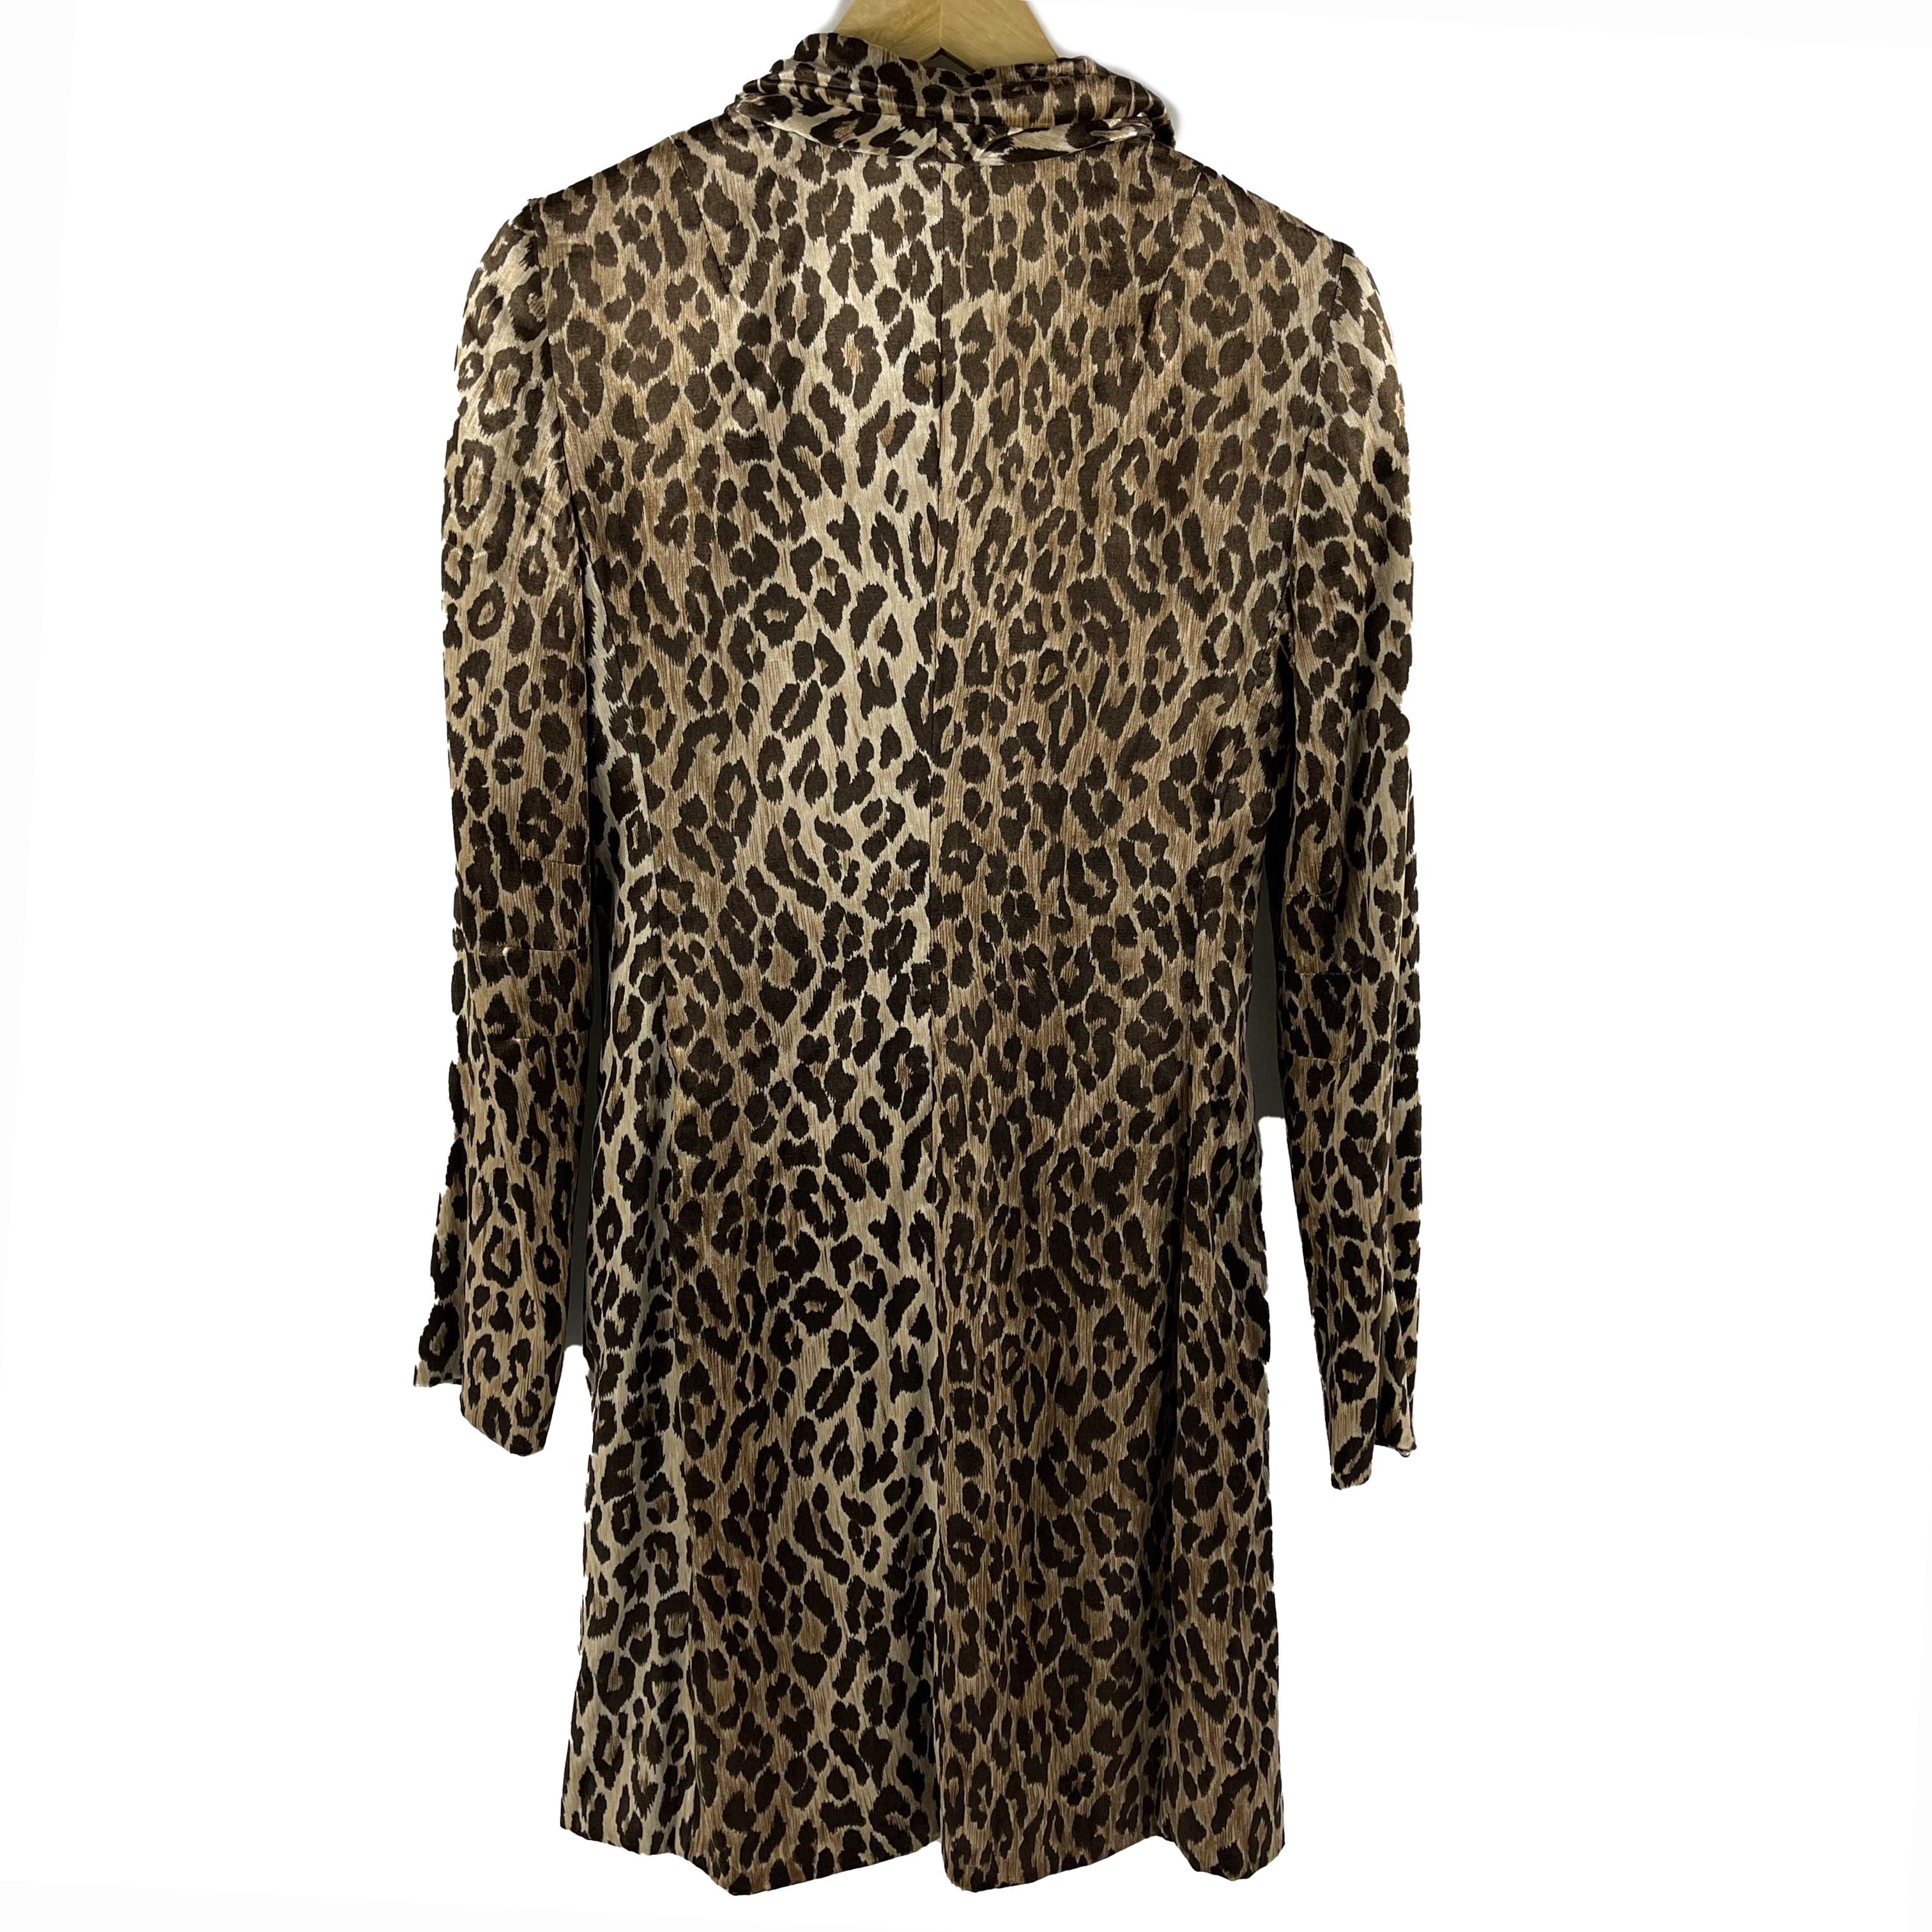 Dolce & Gabbana - Pristine - Vintage Leopard Print Viscose Trench Coat - Brown, Beige - 40 - US M - Jacket

Description

This Dolce & Gabbana coat is vintage and was released sometime in 1990's or early 2000's.
It's crafted with a viscose and cotton